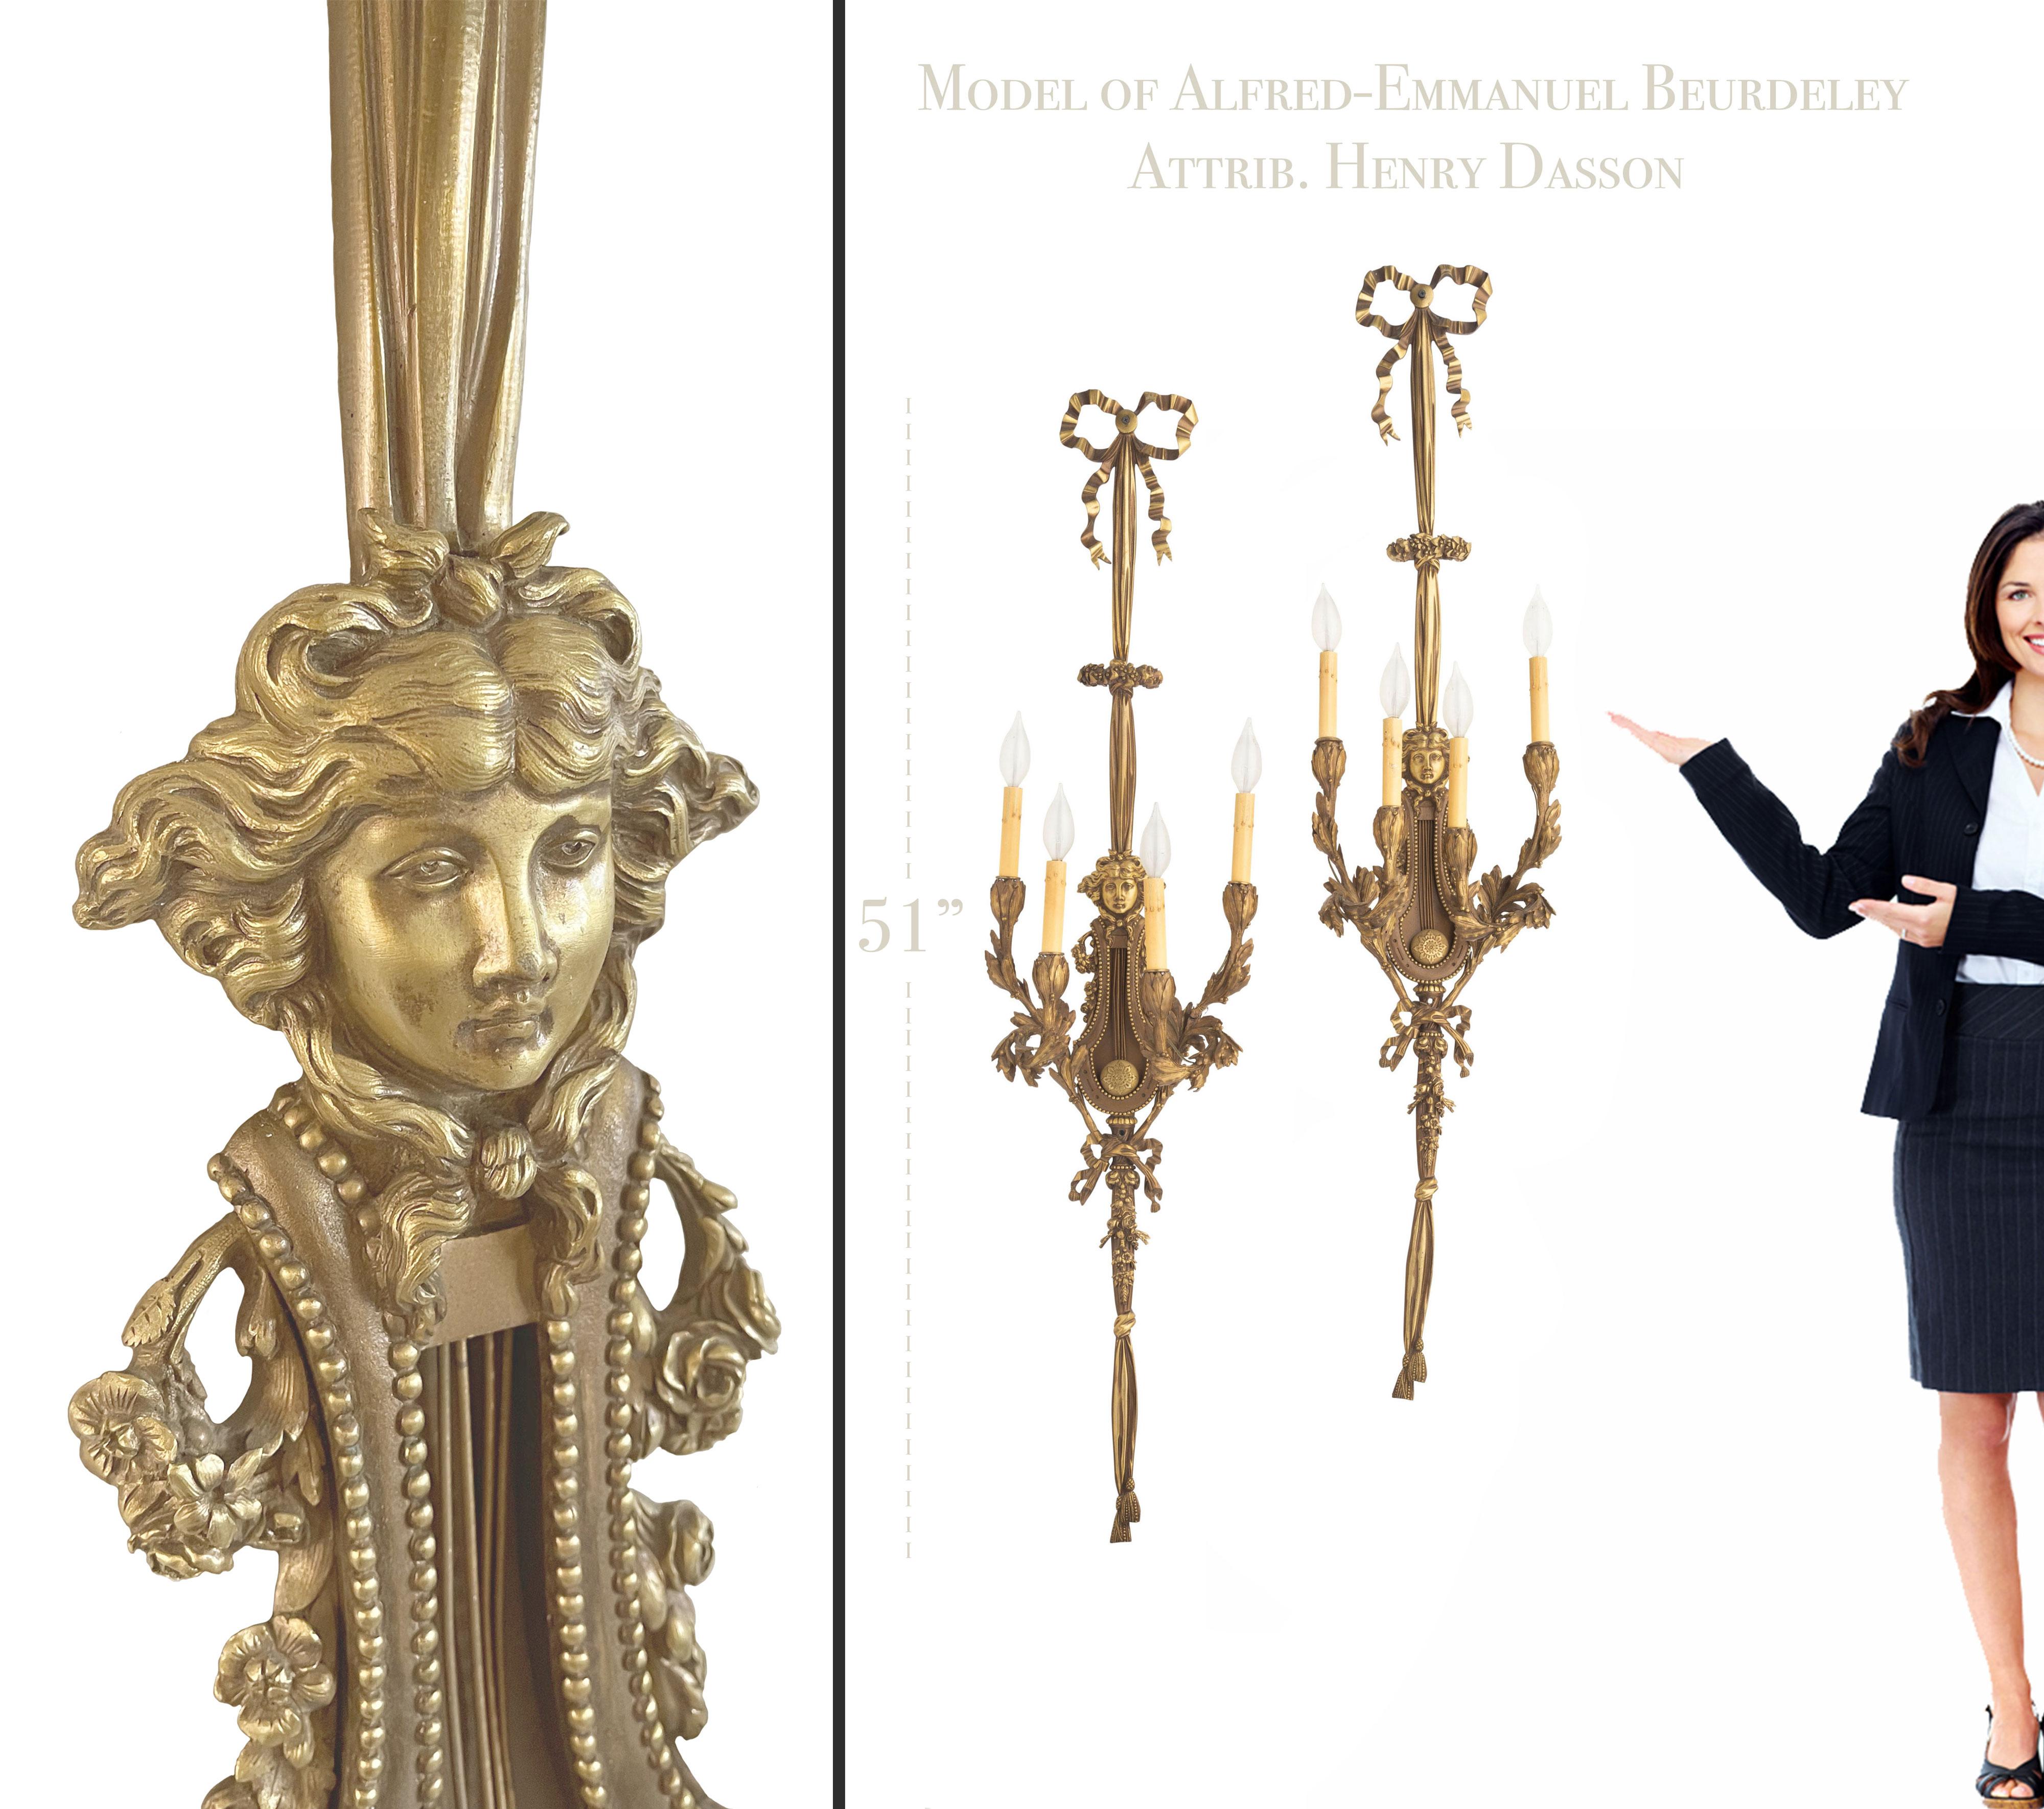 19th C. Pair of French Ormolu four branch wall lights / sconces After Beurdeley Attrb. Henry Dasson.

H 51